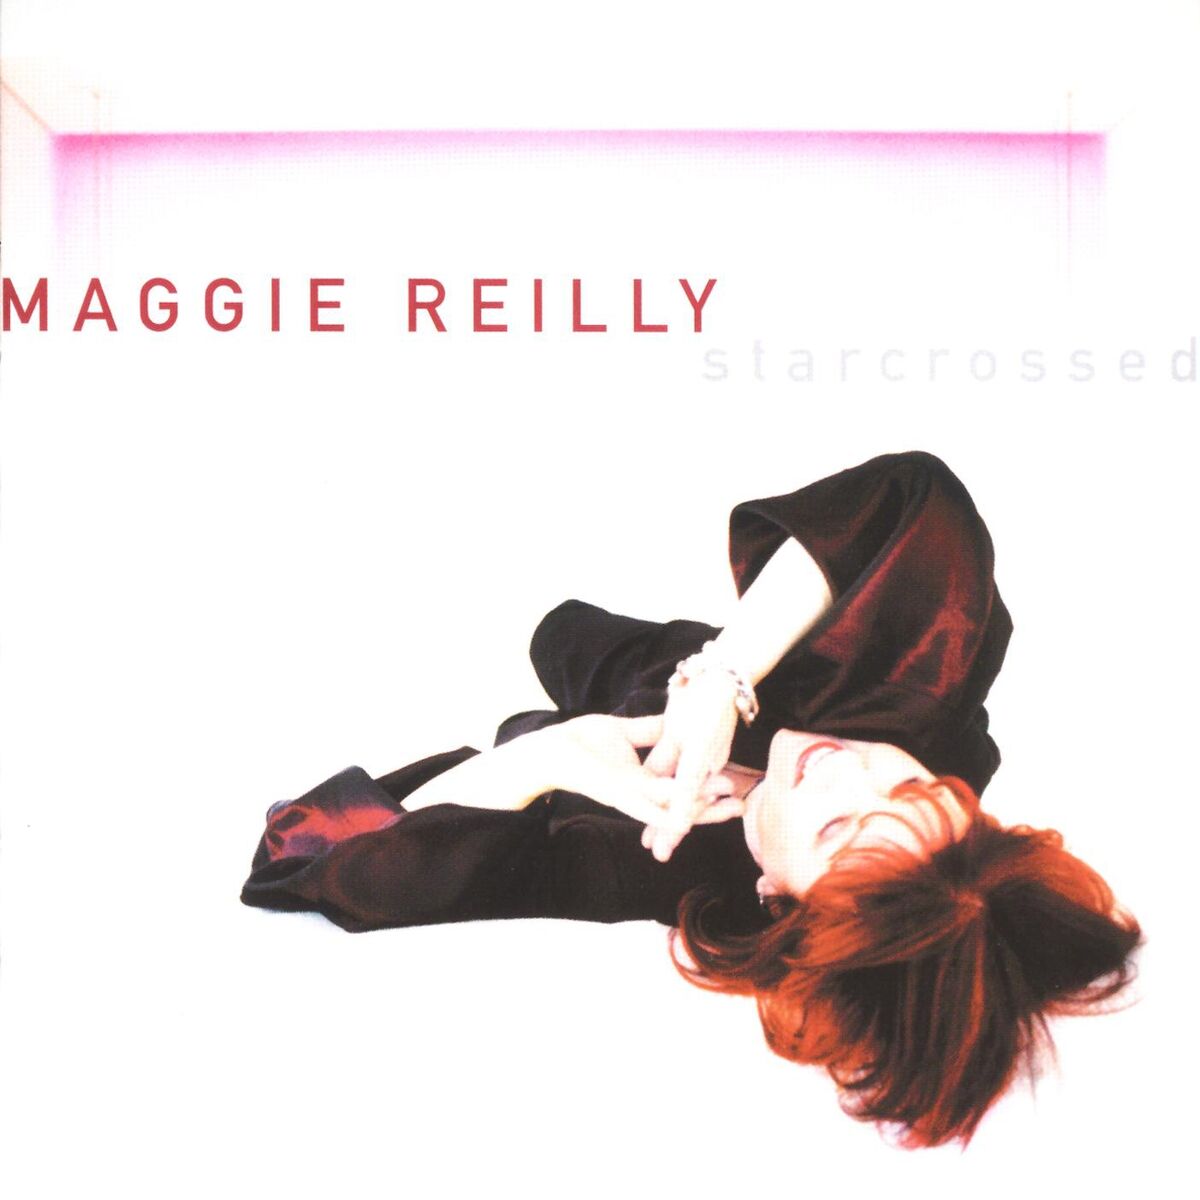 Maggie Reilly: albums